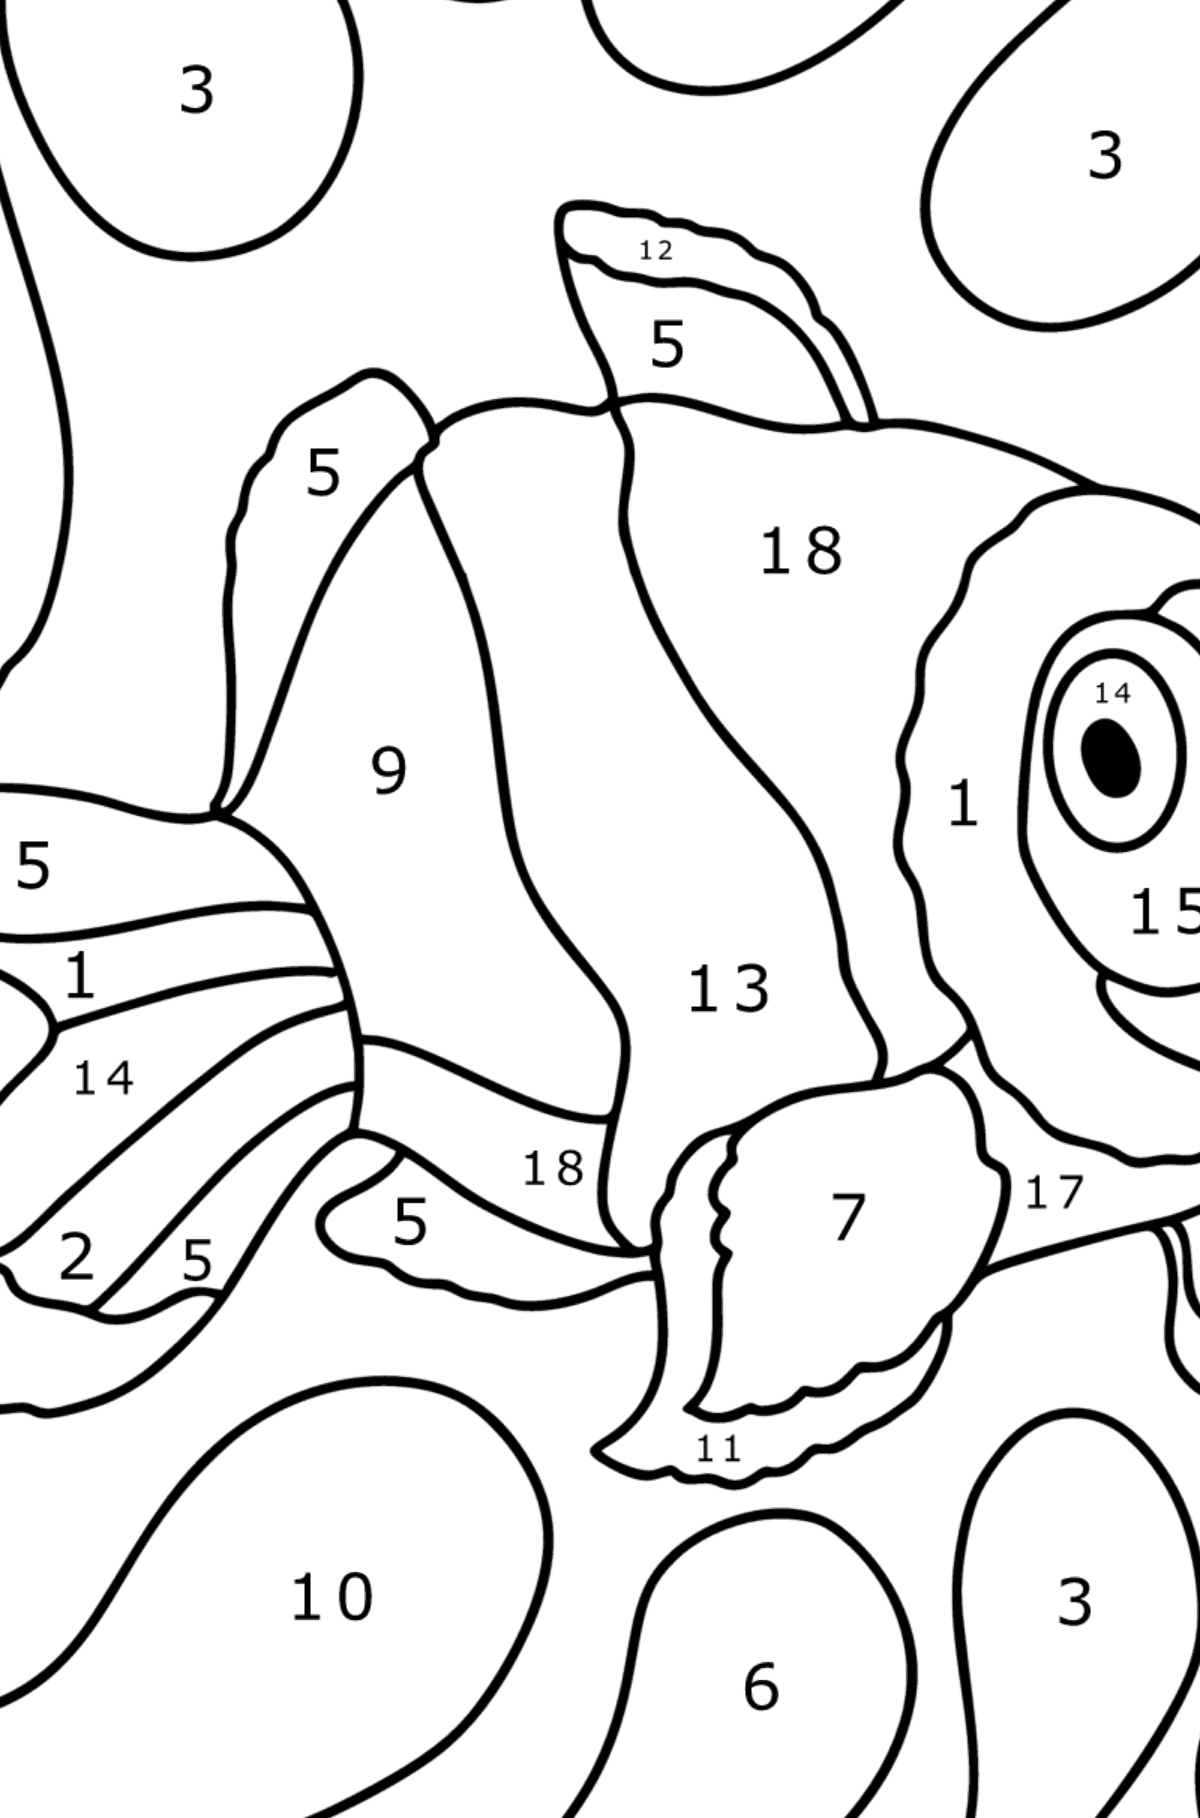 Clown fish coloring page - Coloring by Numbers for Kids